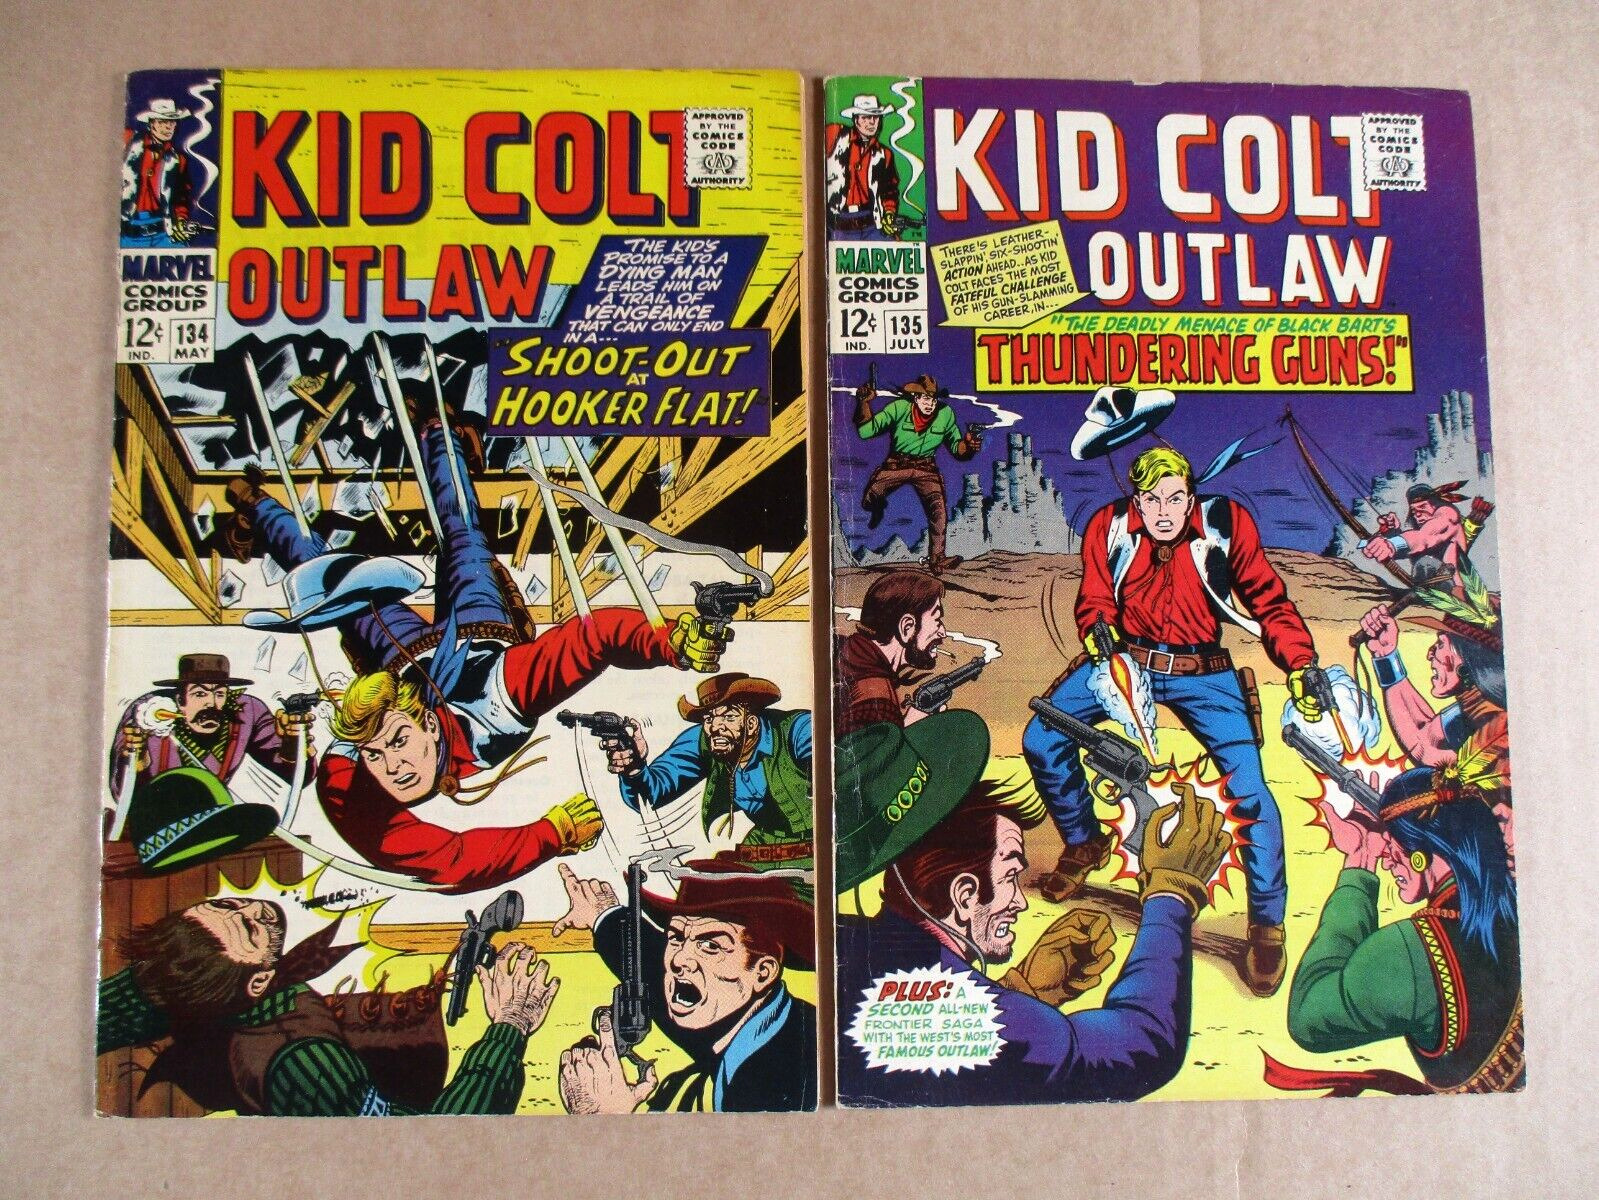 Kid Colt Outlaw # 134 135 Marvel Western Comics 1967 Good Condition Books